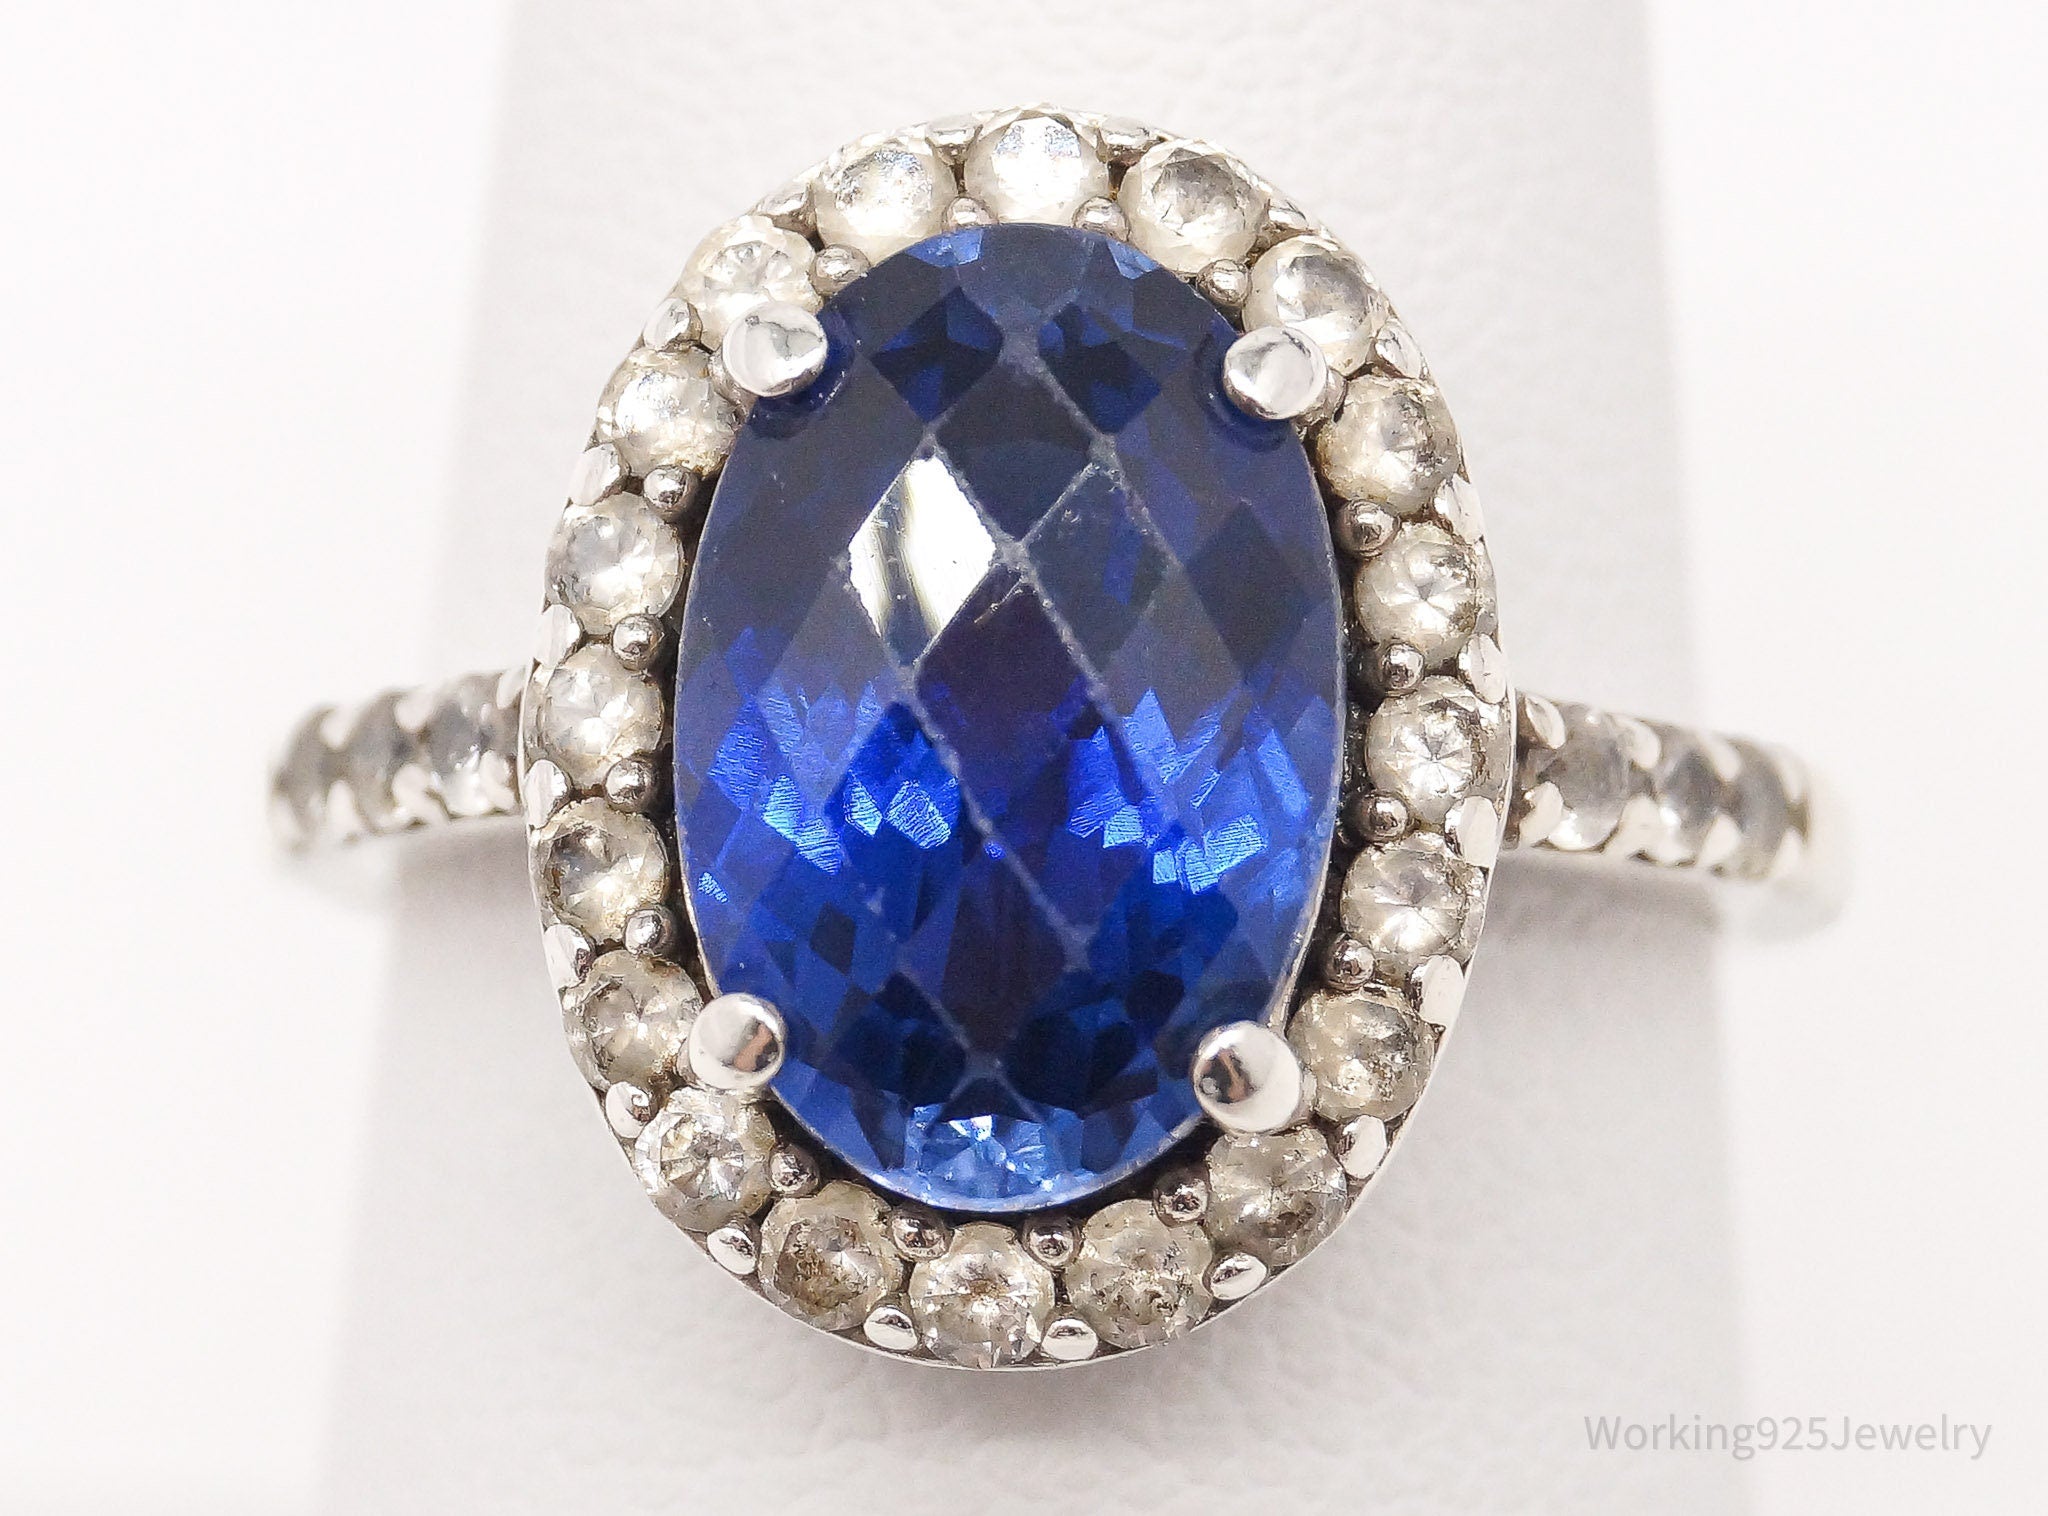 Vintage Blue & White Lab Sapphire Sterling Silver Ring - Size 7.5